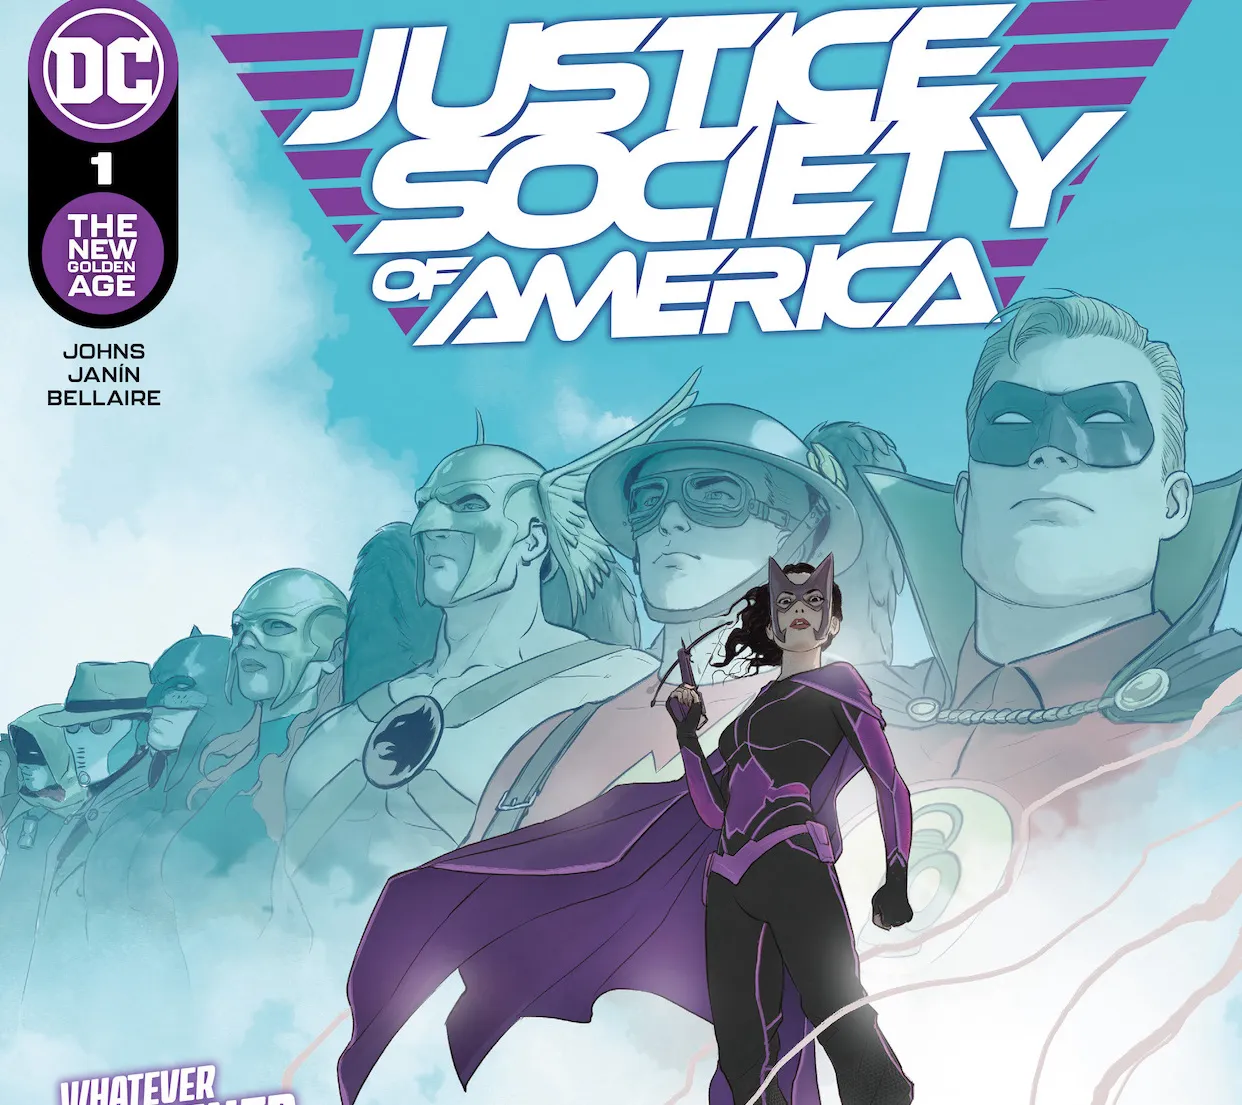 'Justice Society of America' #1 review: The New Golden Age marches forward